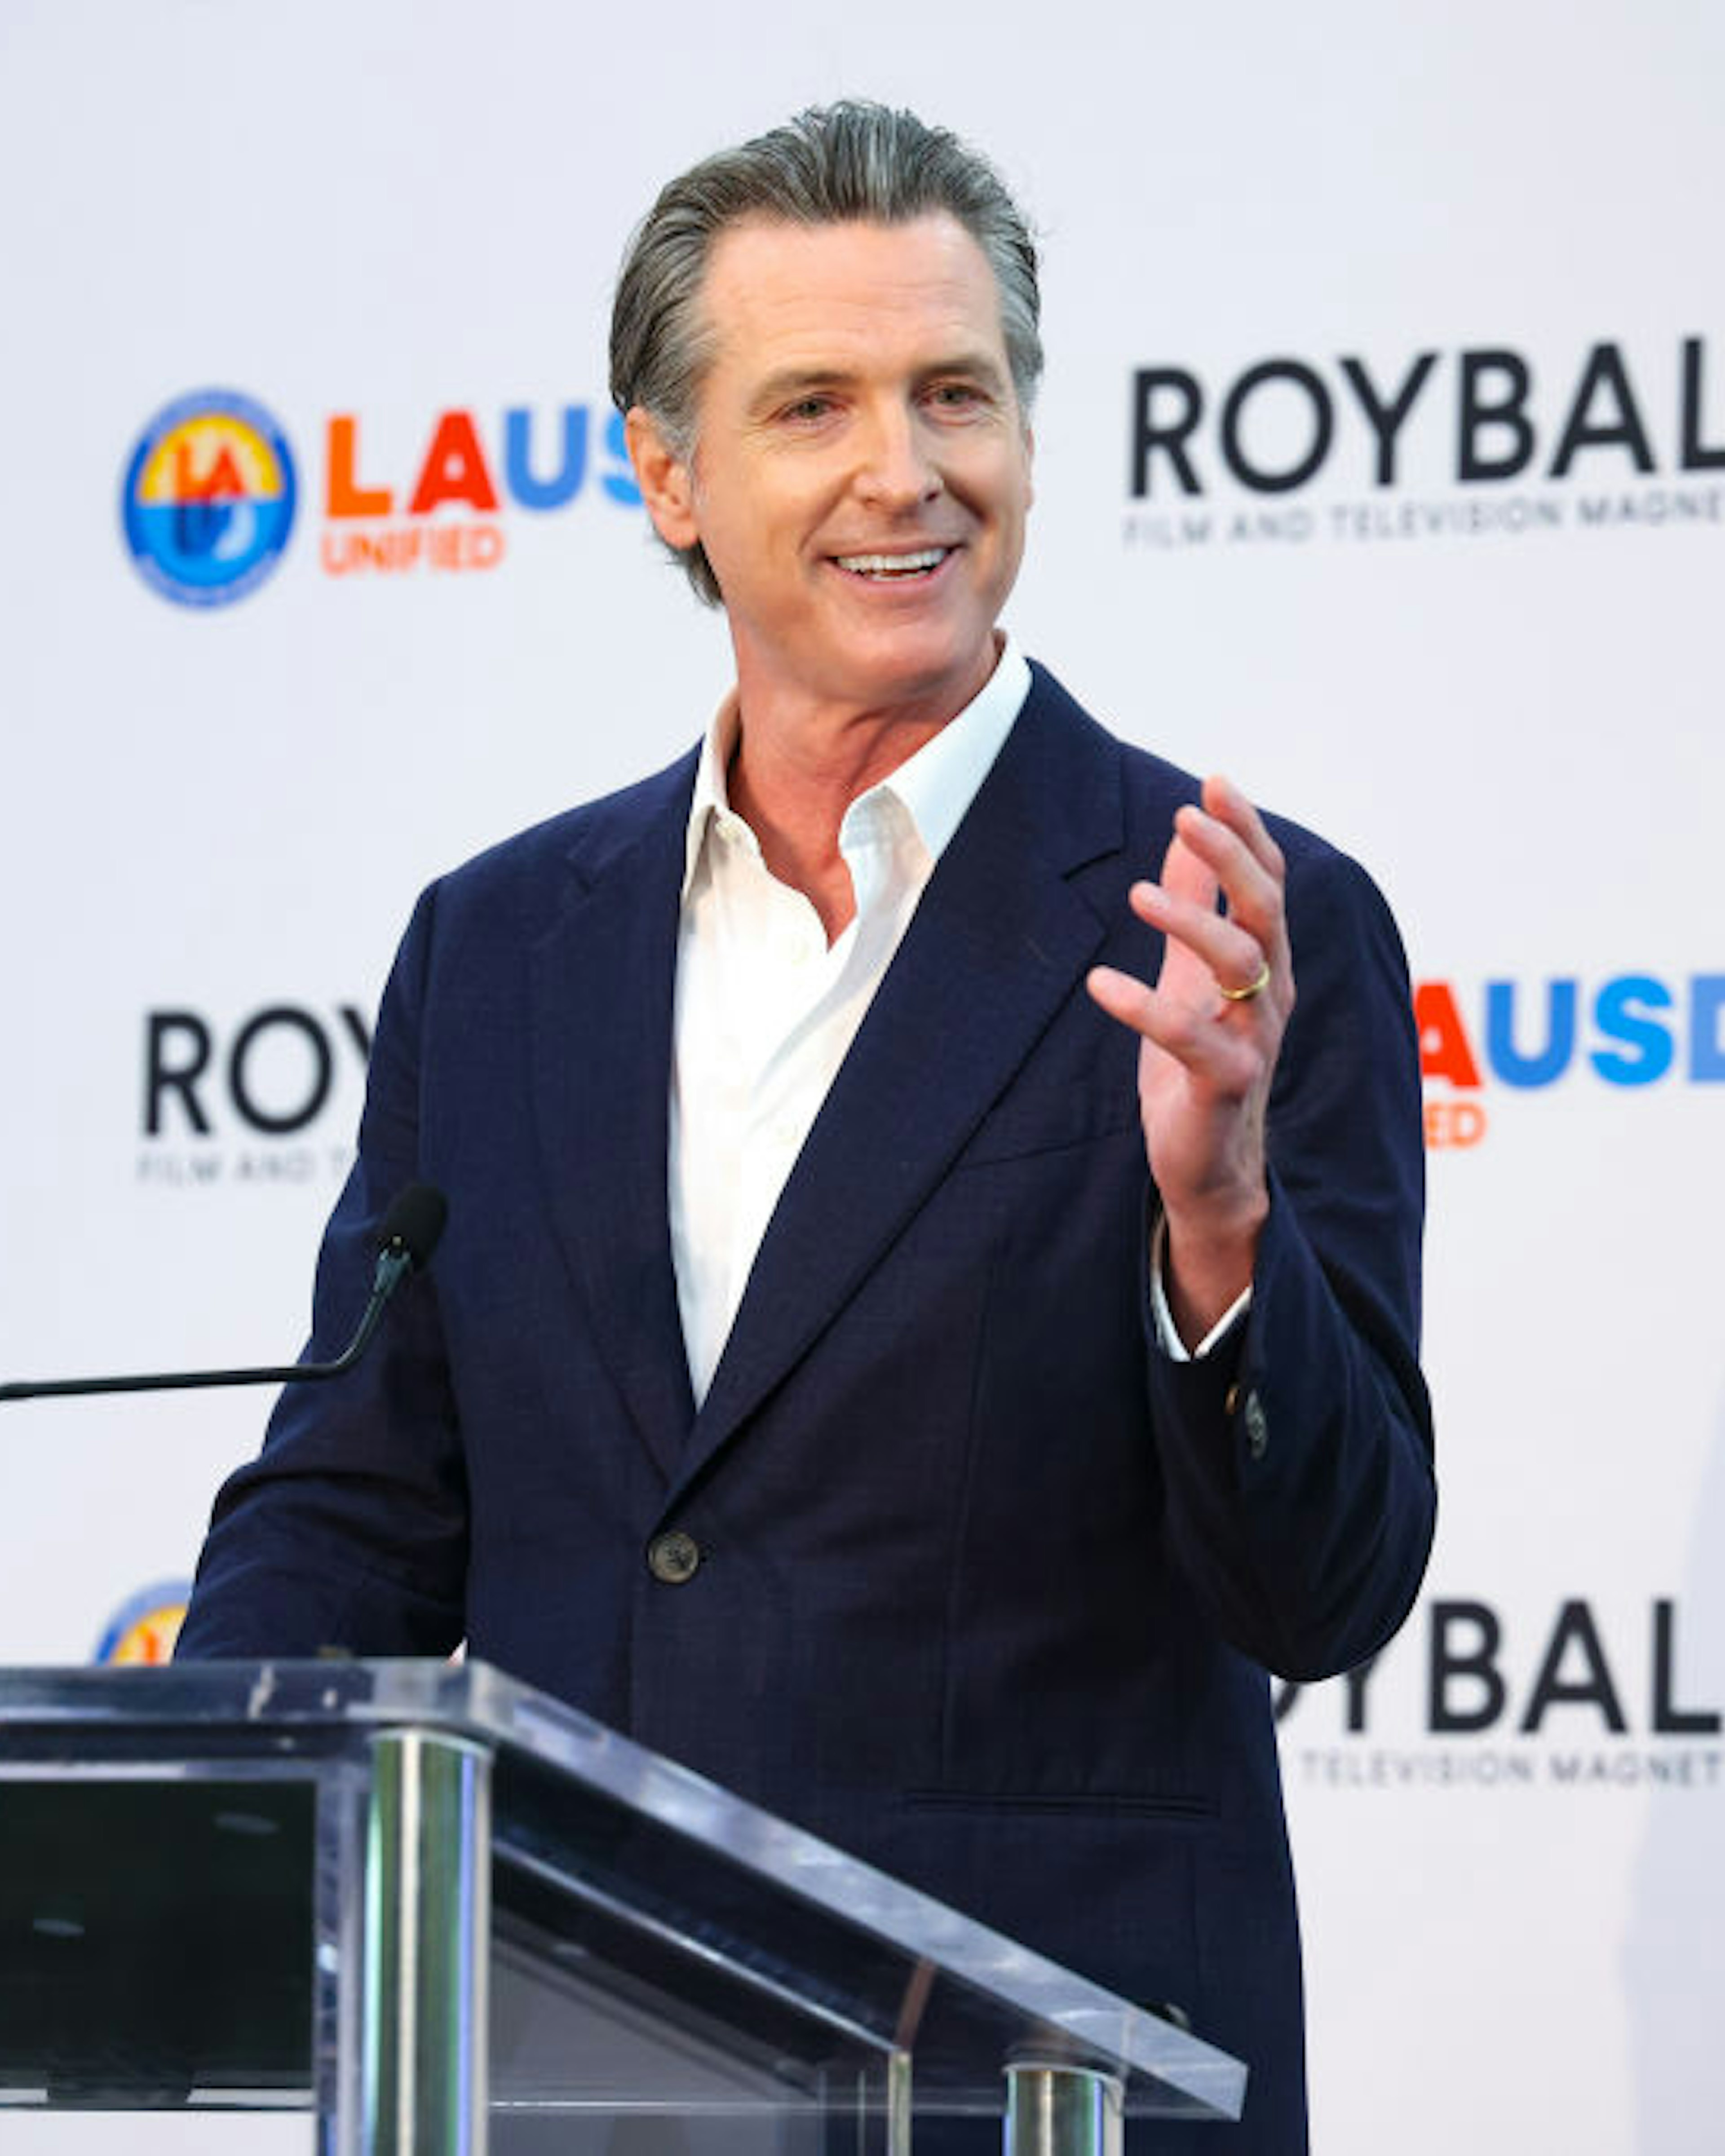 LOS ANGELES, CALIFORNIA - OCTOBER 13: Governor Gavin Newsom attends a pep rally to celebrate the second year of the Roybal Film and Television Production School on October 13, 2023 in Los Angeles, California. (Photo by Randy Shropshire/Getty Images for Entertainment Industry Foundation)